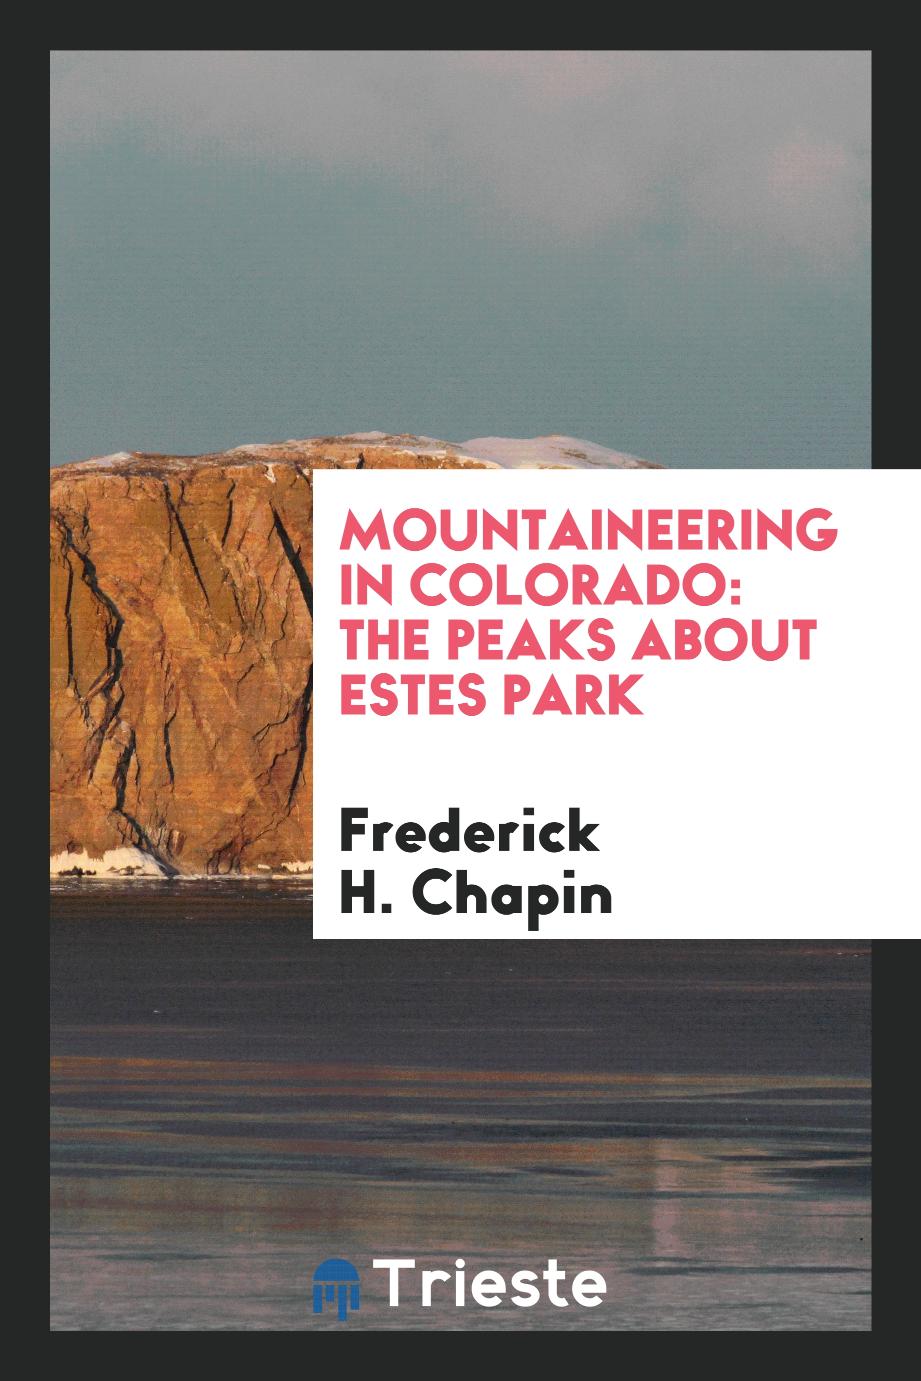 Mountaineering in Colorado: the peaks about Estes Park